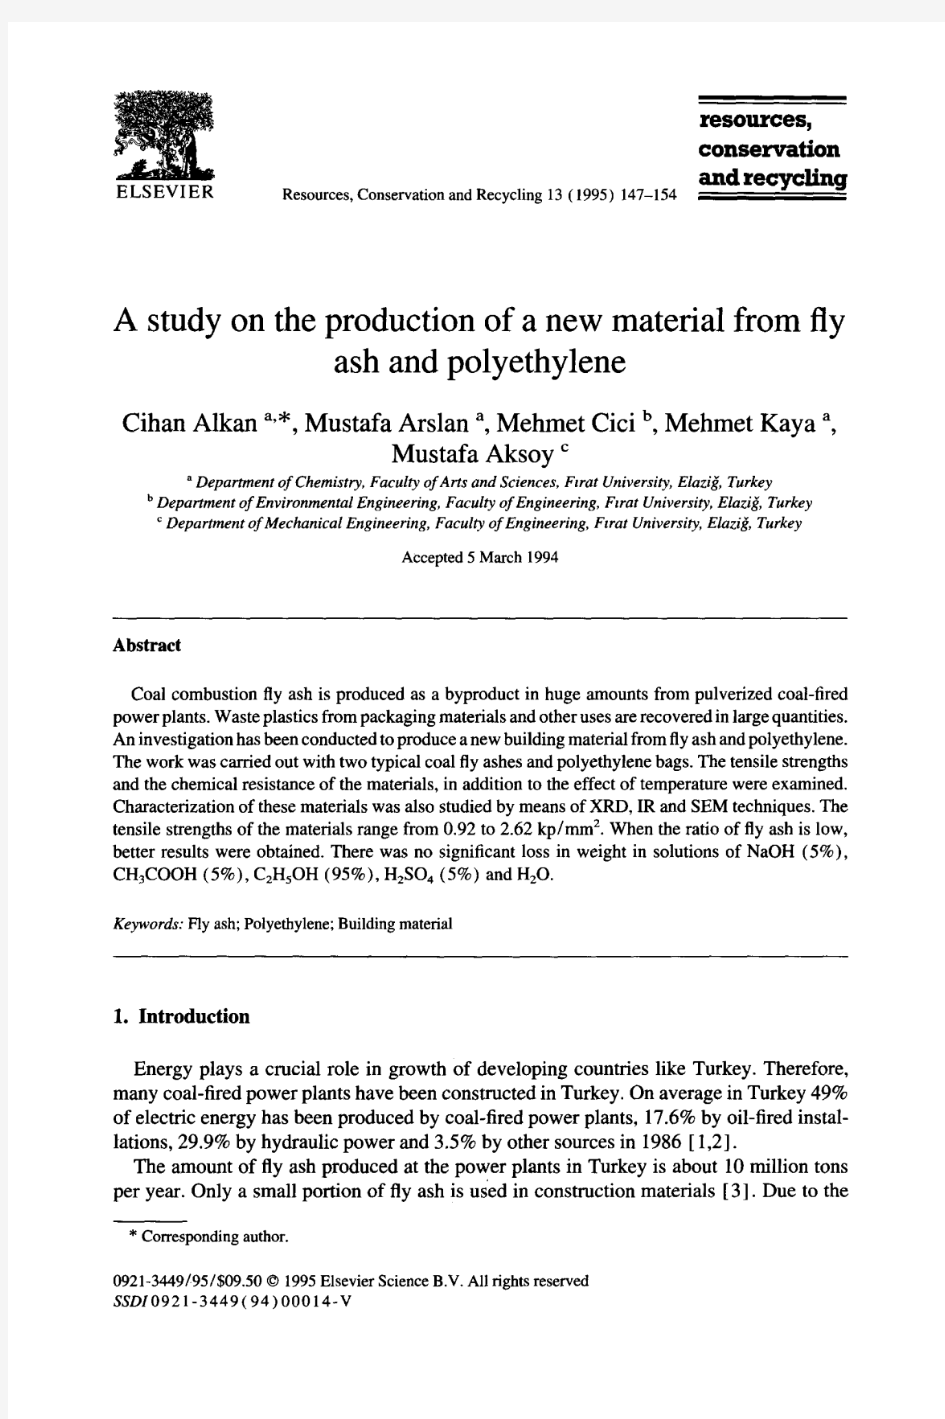 A  study  on  the production  of a new material  from  fly ash and polyethylene